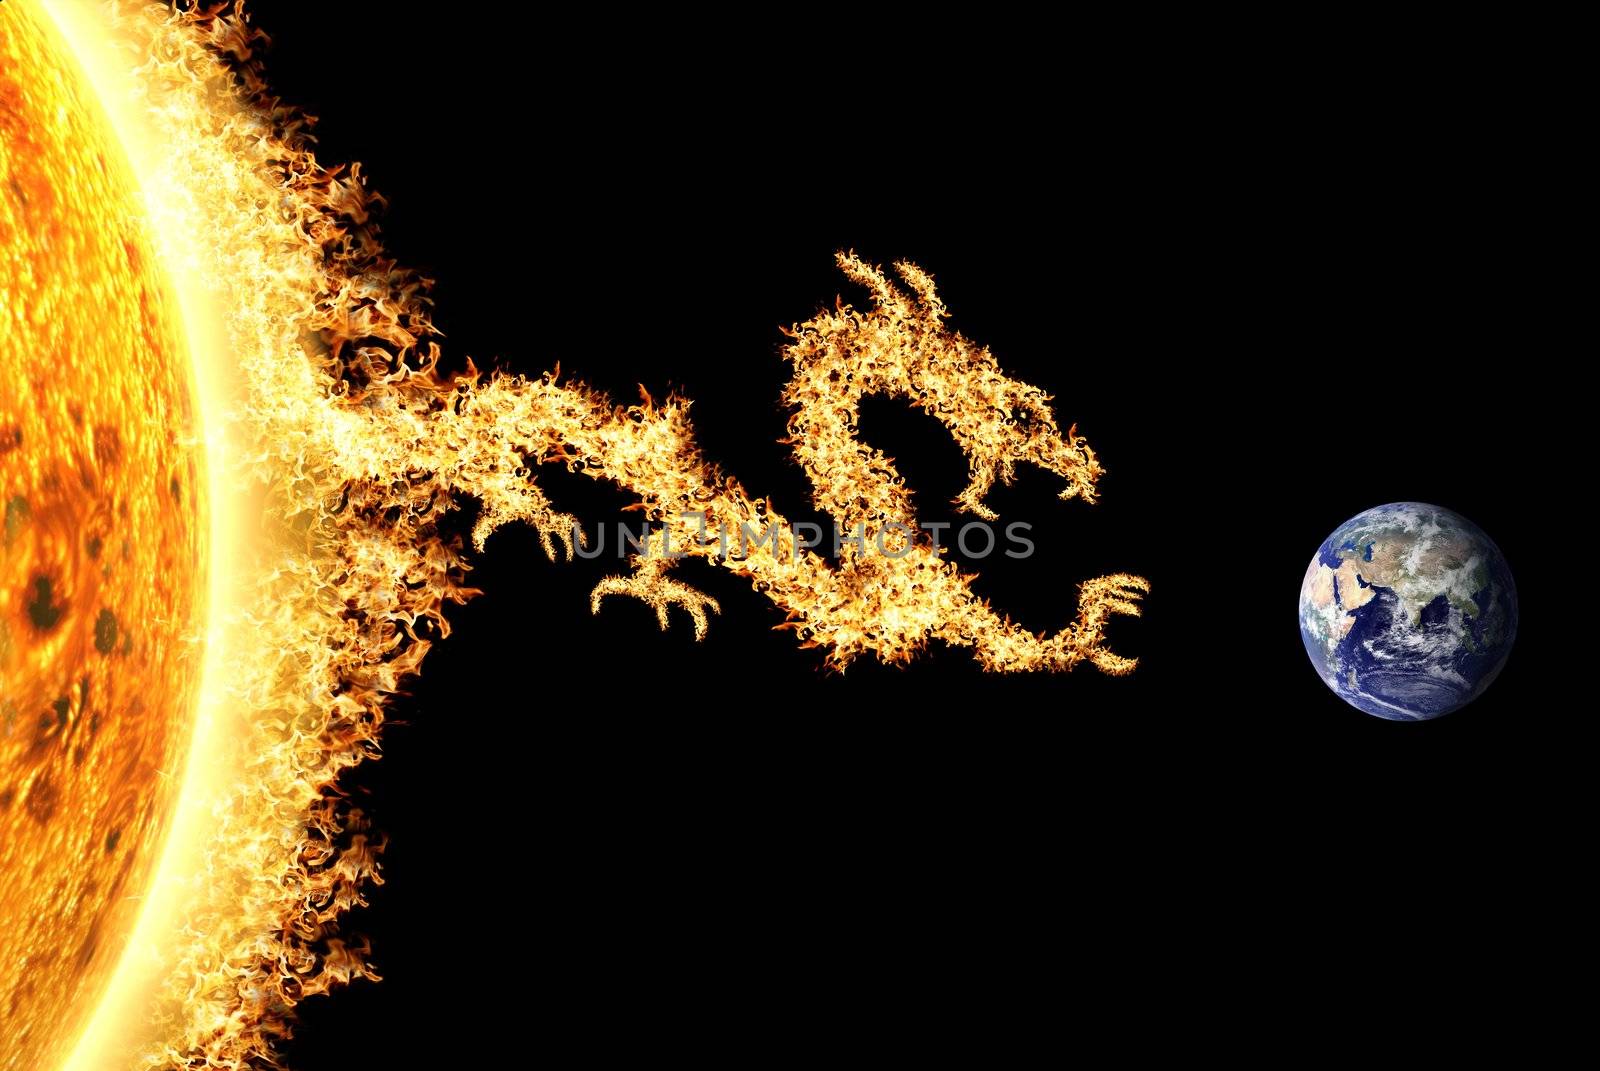 Fire dragon from the Sun heading towards Earth, described the solar storm and solar effect. Can be use for background and prints out.